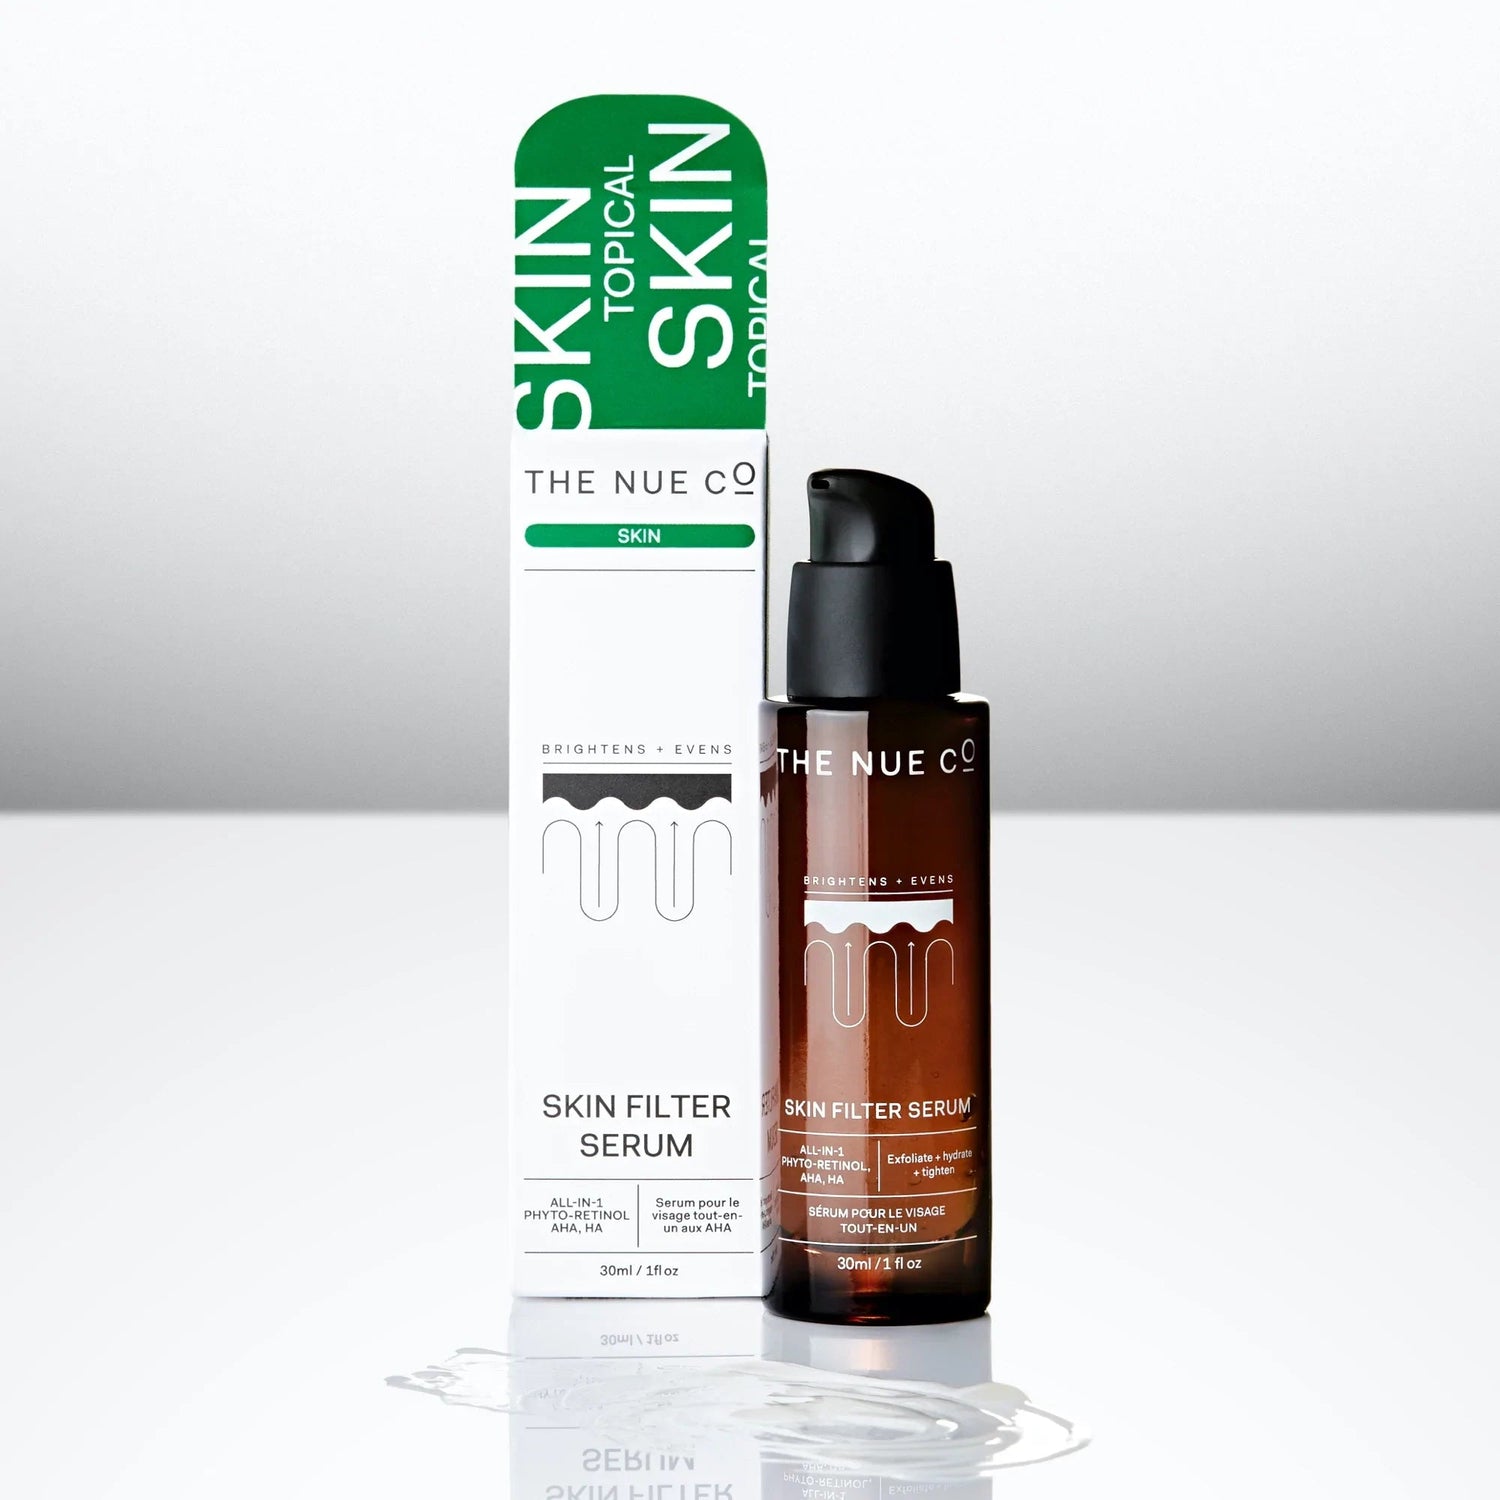 SKIN FILTER SERUM - 6 MONTH Subscription Only The Nue Co. 